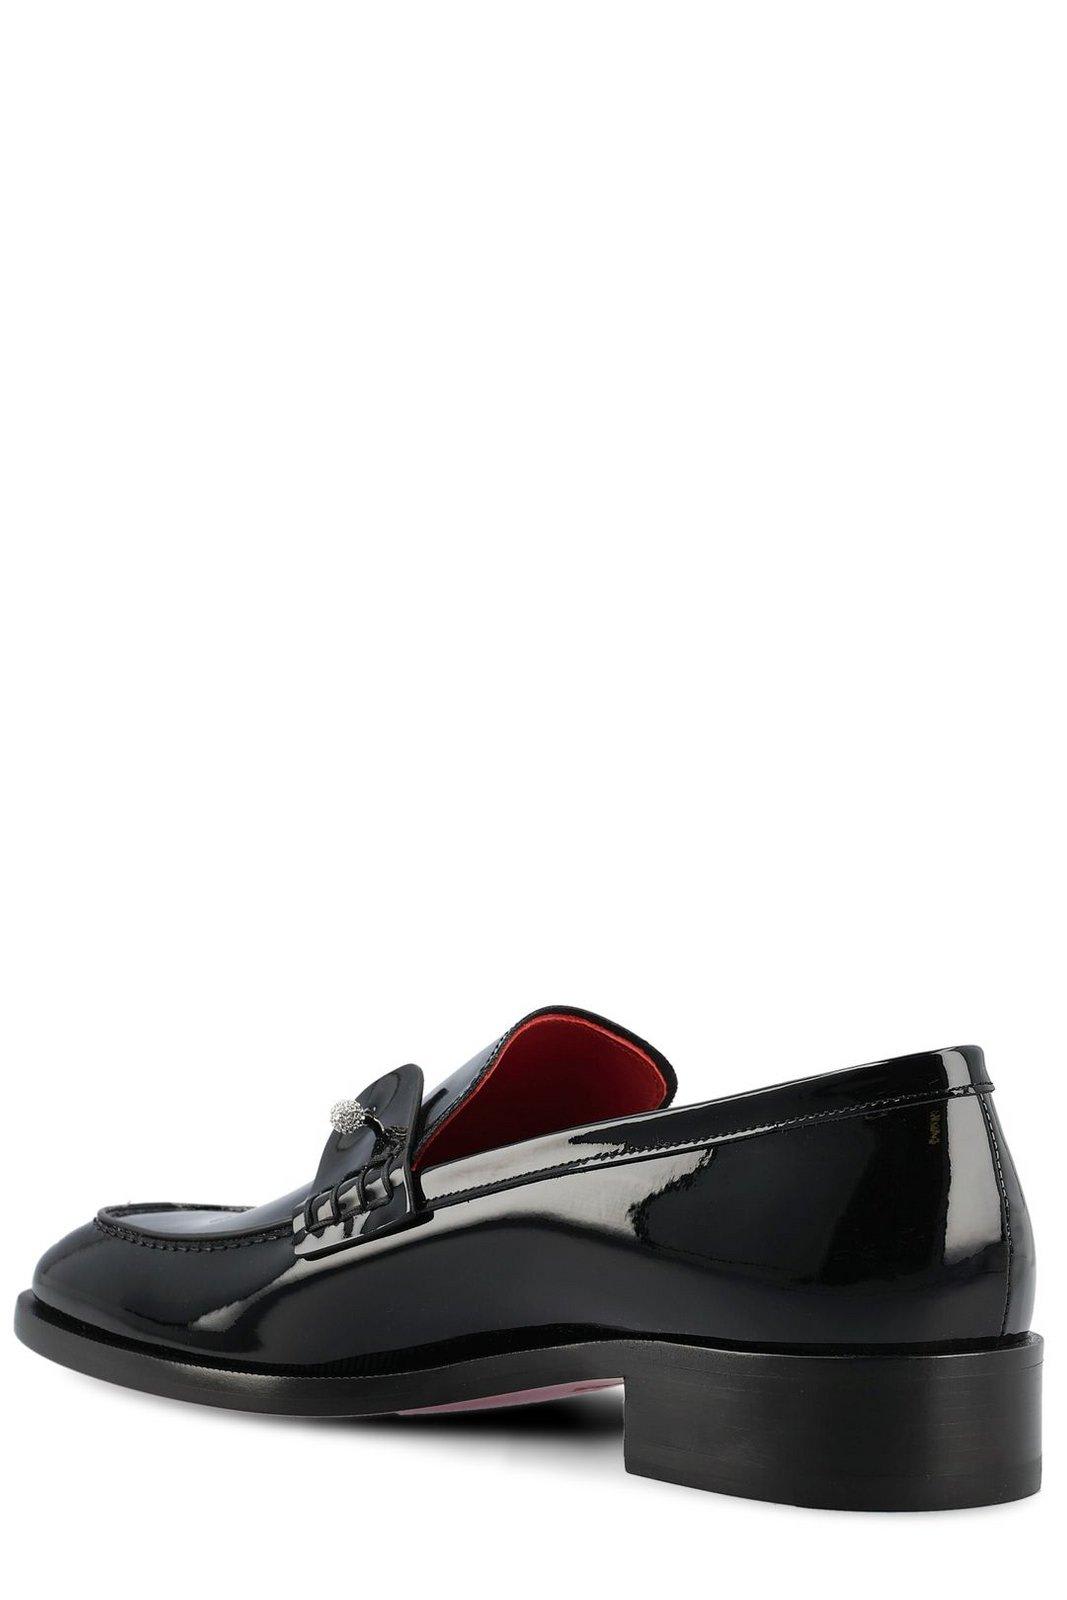 Shop Christian Louboutin Chambelimoc Slip-on Loafers In Black